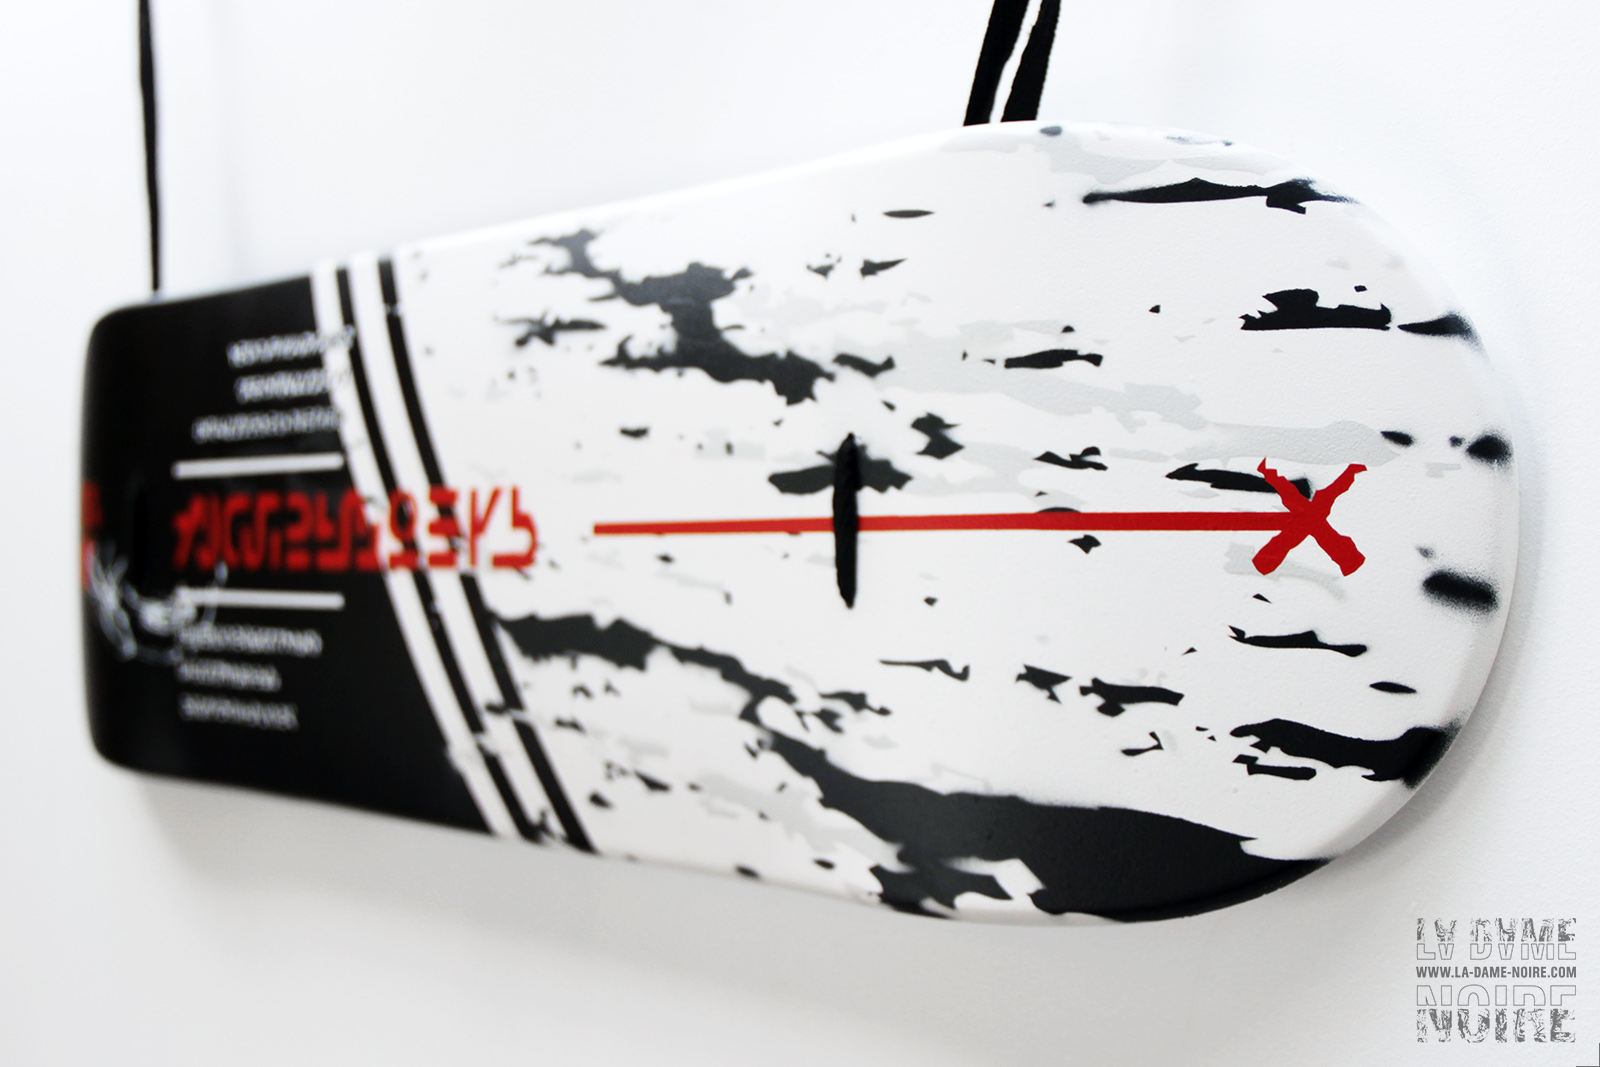 Details of the skateboard paint in white and black stripes with a red cross